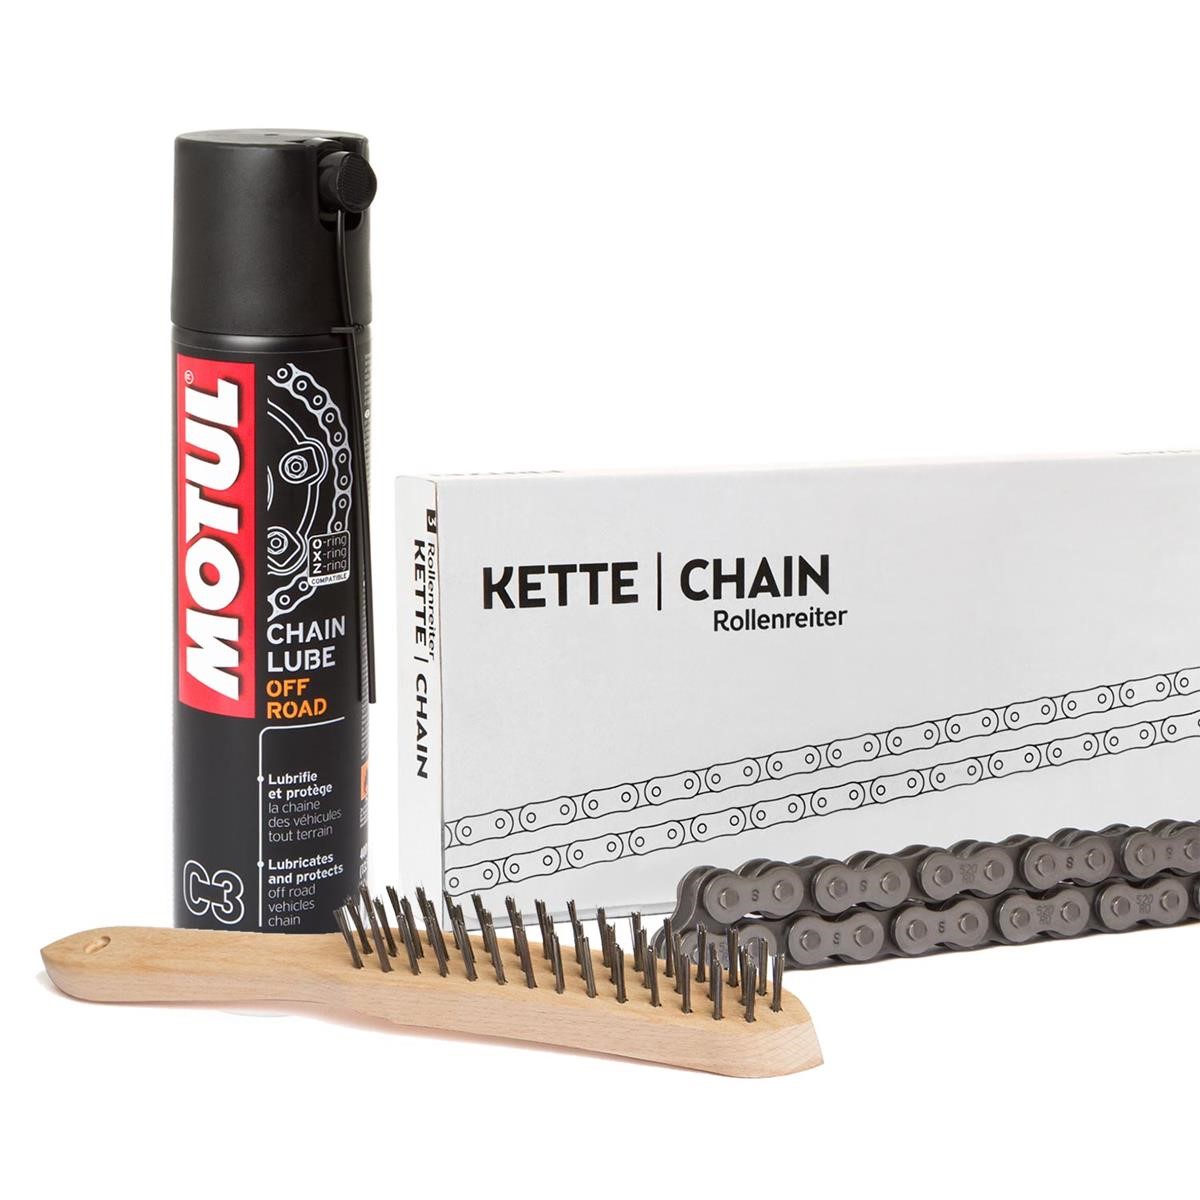 FRITZEL Catena Rollenreiter 520 Pitch, Super Reinforced inkl. Motul Chain Lube 400 ml and Wire Brush For Free